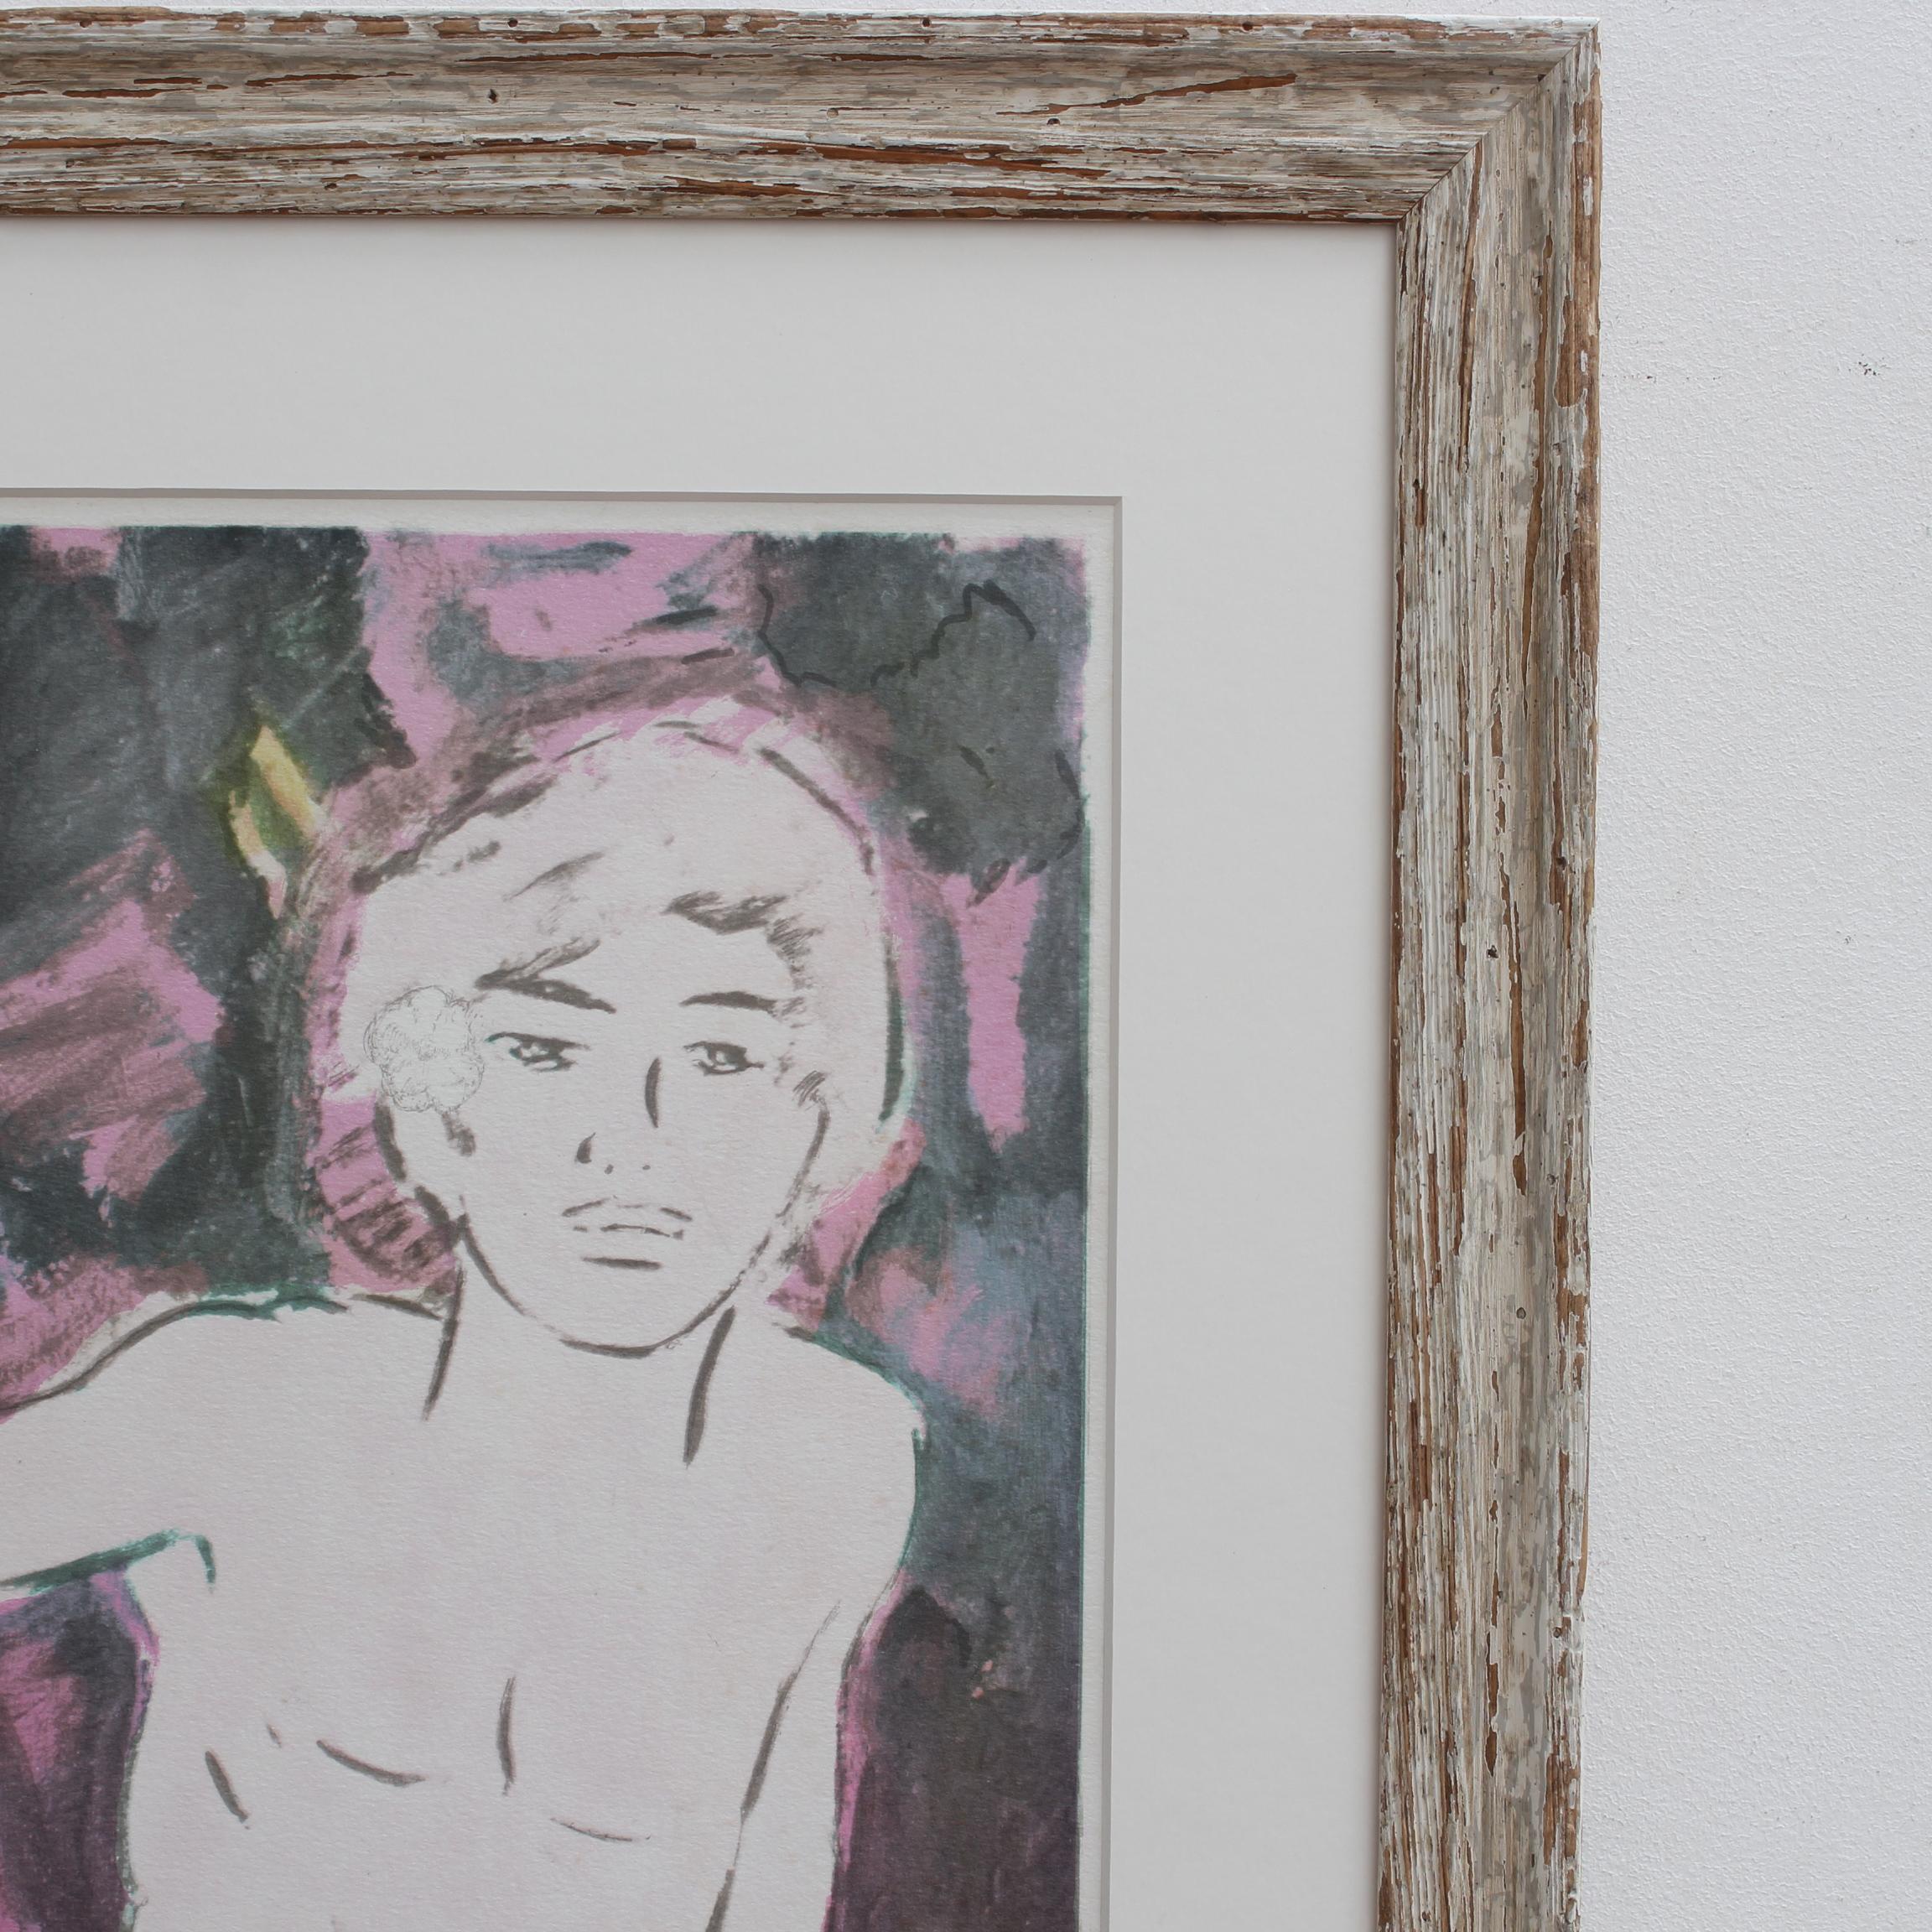 'Balinese Boy' by Arie Smit - Original Signed Lithograph (circa 1980s) 75/99 For Sale 6